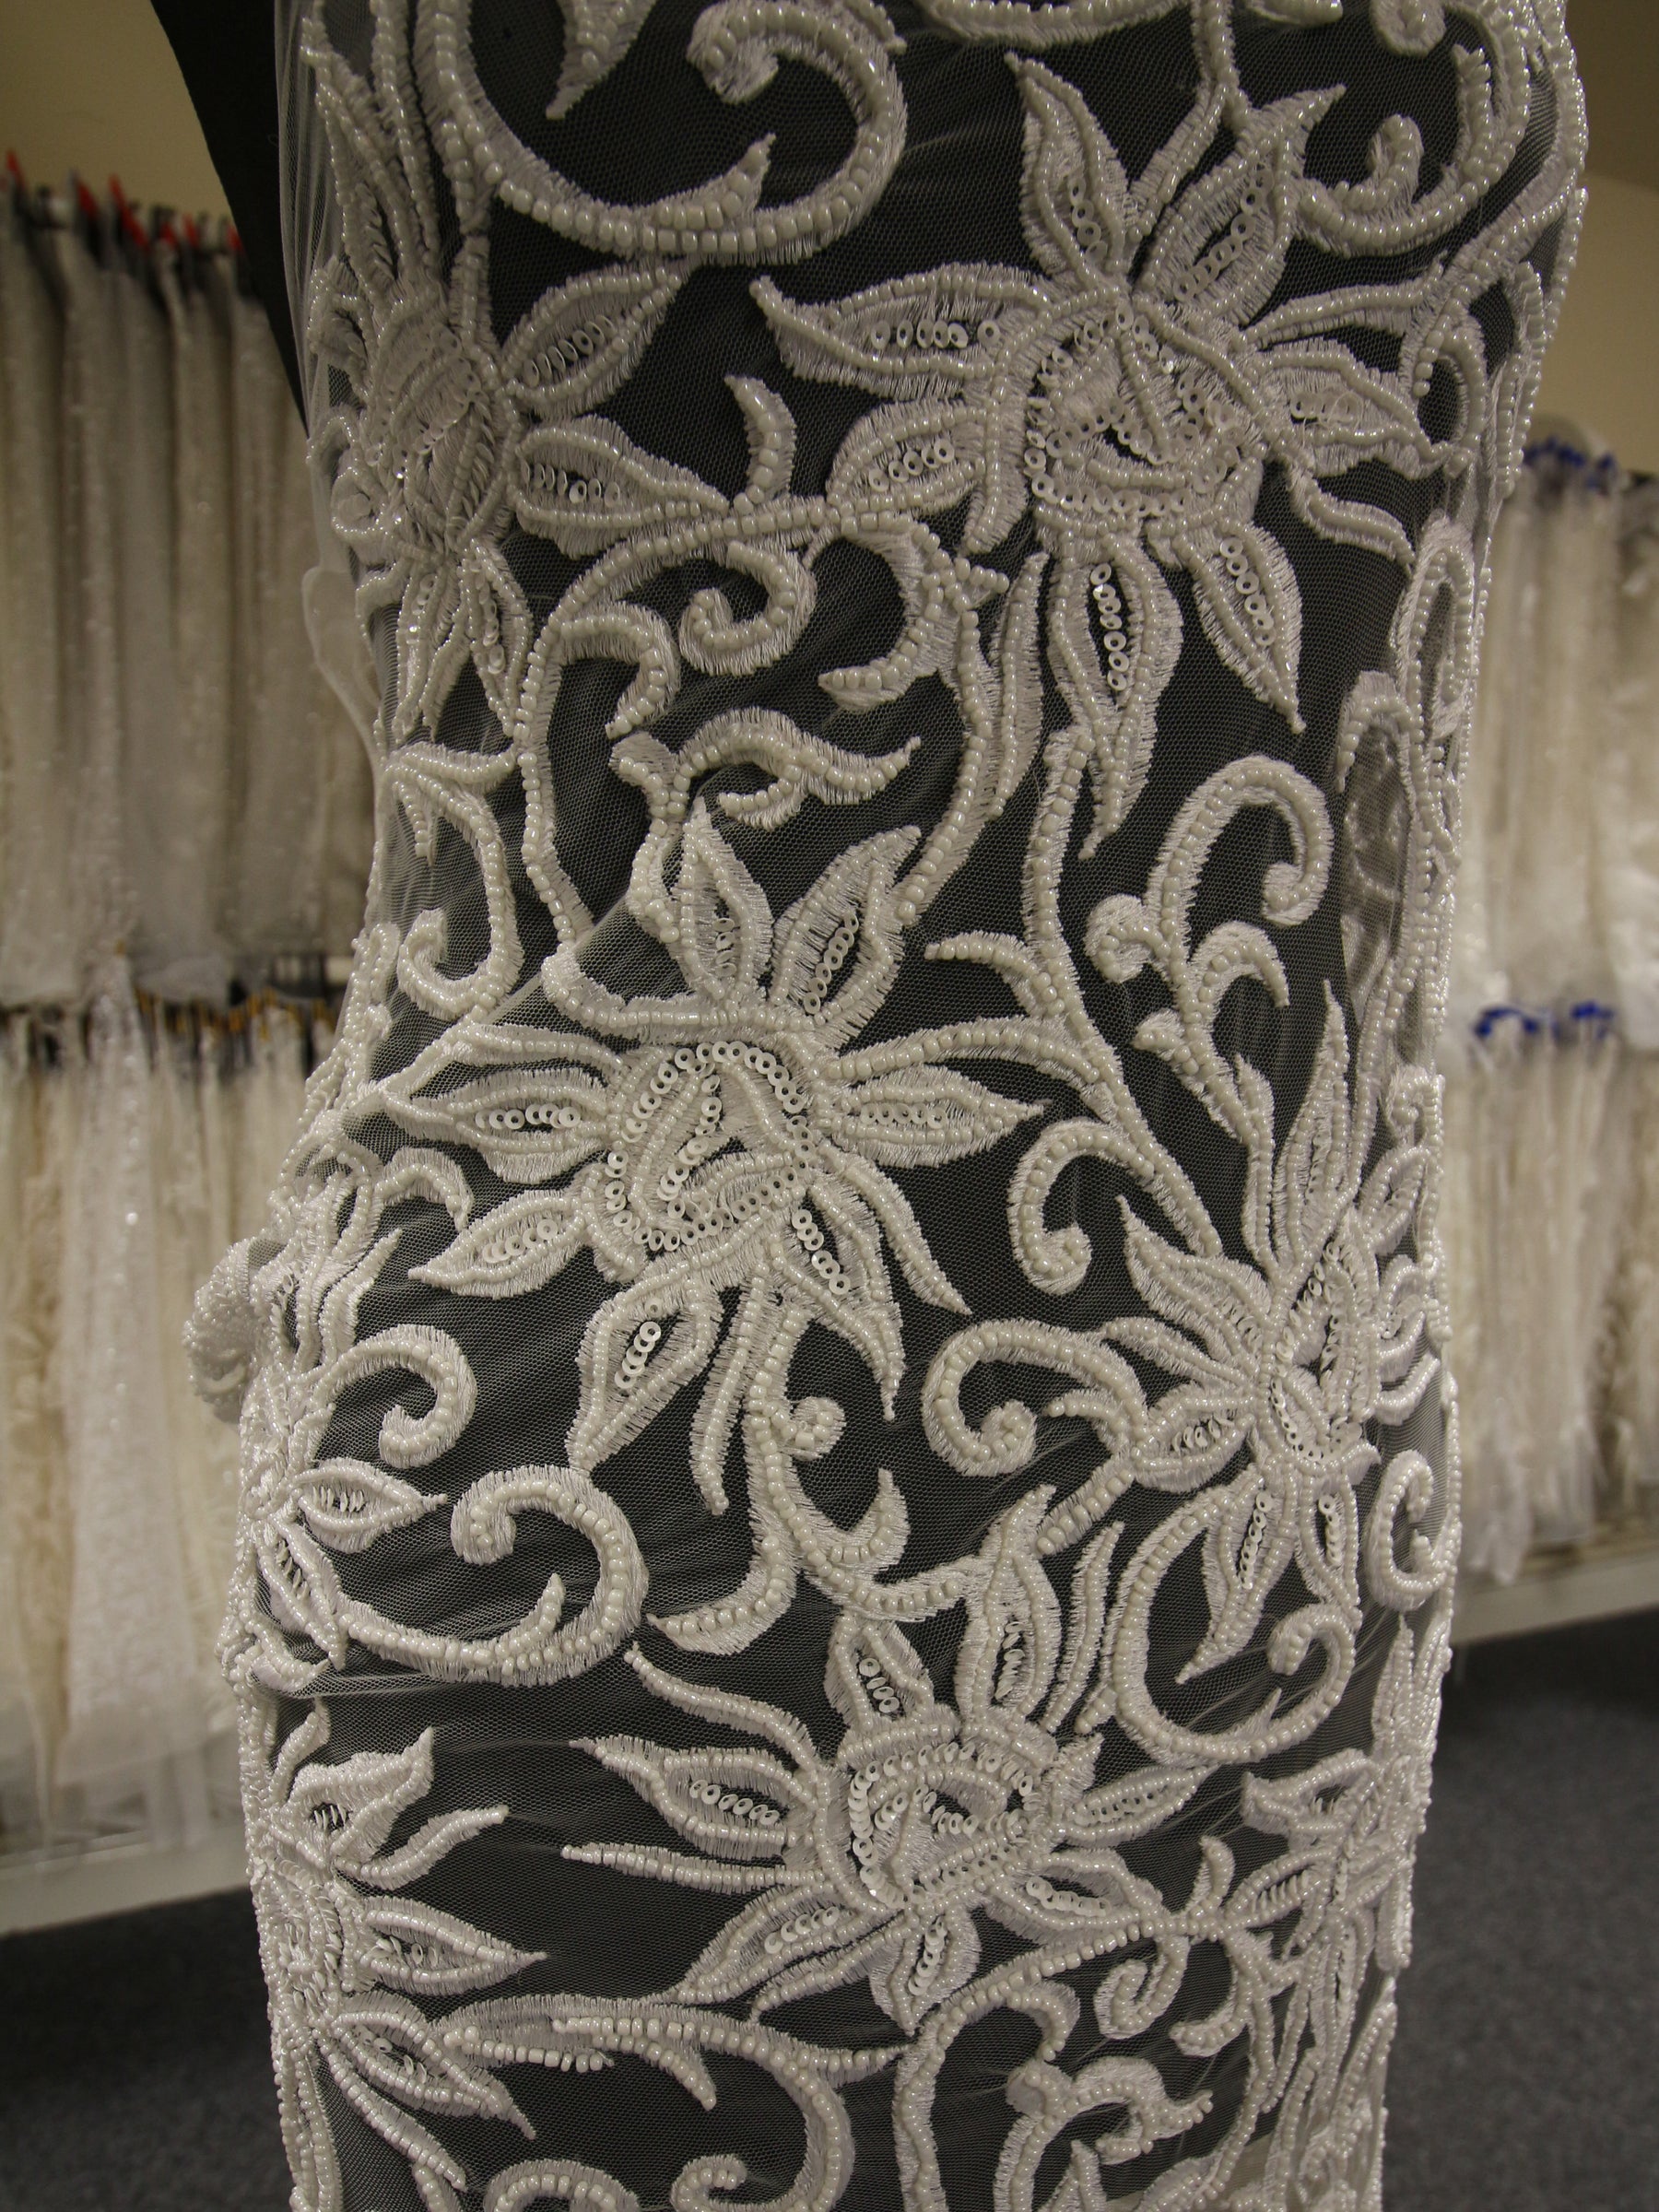 Ivory Beaded Embroidery Lace - Elsie